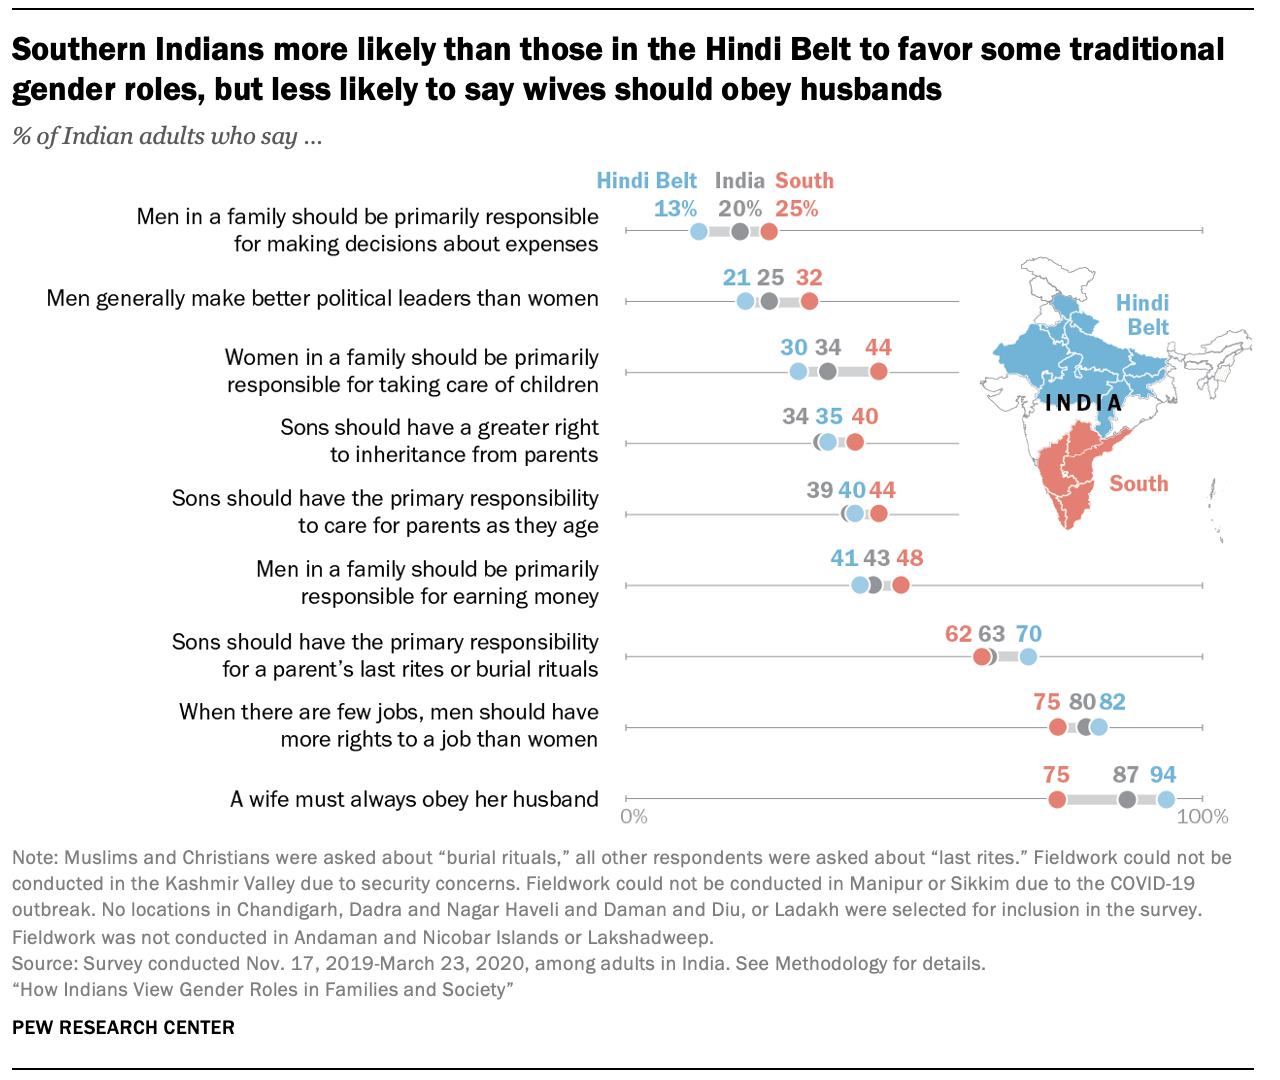 Southern Indians more likely than those in the Hindi Belt to favor some traditional gender roles, but less likely to say wives should obey husbands